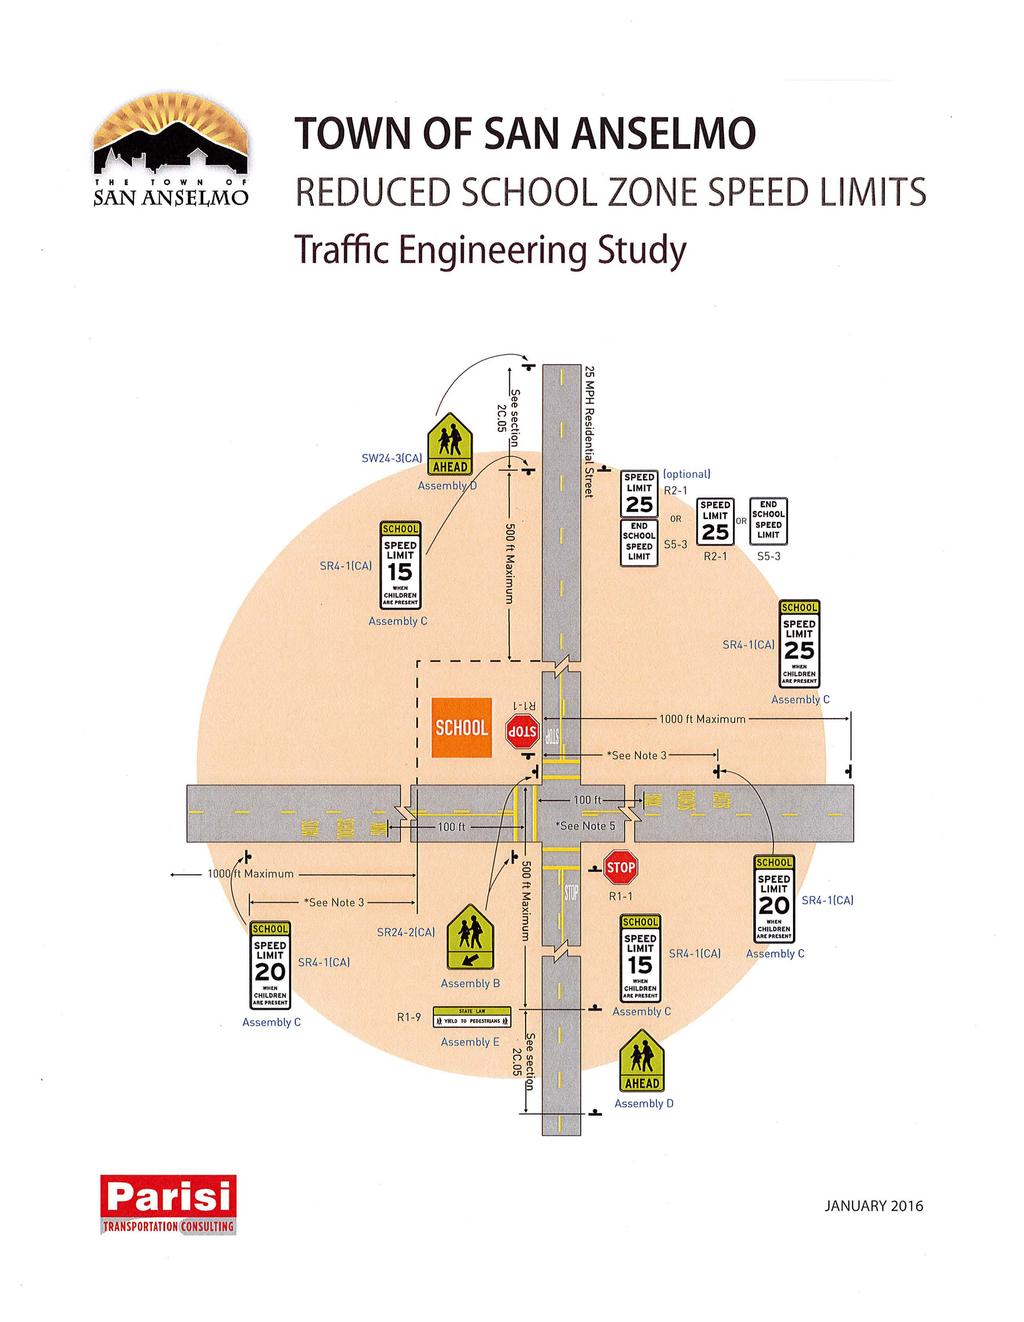 THE TOWN OF SAN ANSELMO TOWN OF SAN ANSELMO REDUCED SCHOOL ZONE SPEED LIMITS Traffic Engineering Study 5R4-1ICAI WHCN CHILDREN Assembly C (.